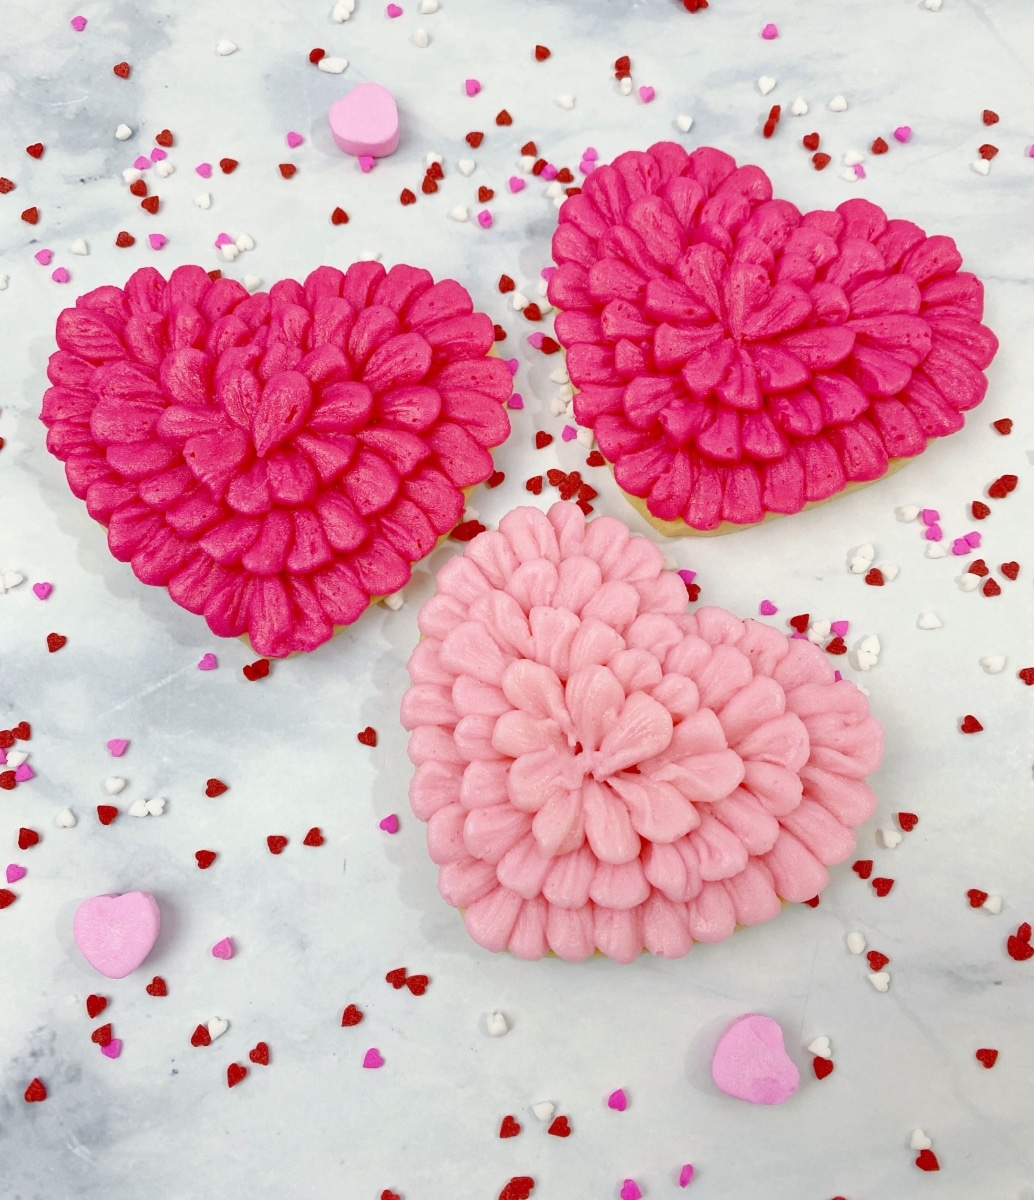 Valentine's Day Ruffle Heart Cookies with Buttercream Frosting Tutorial